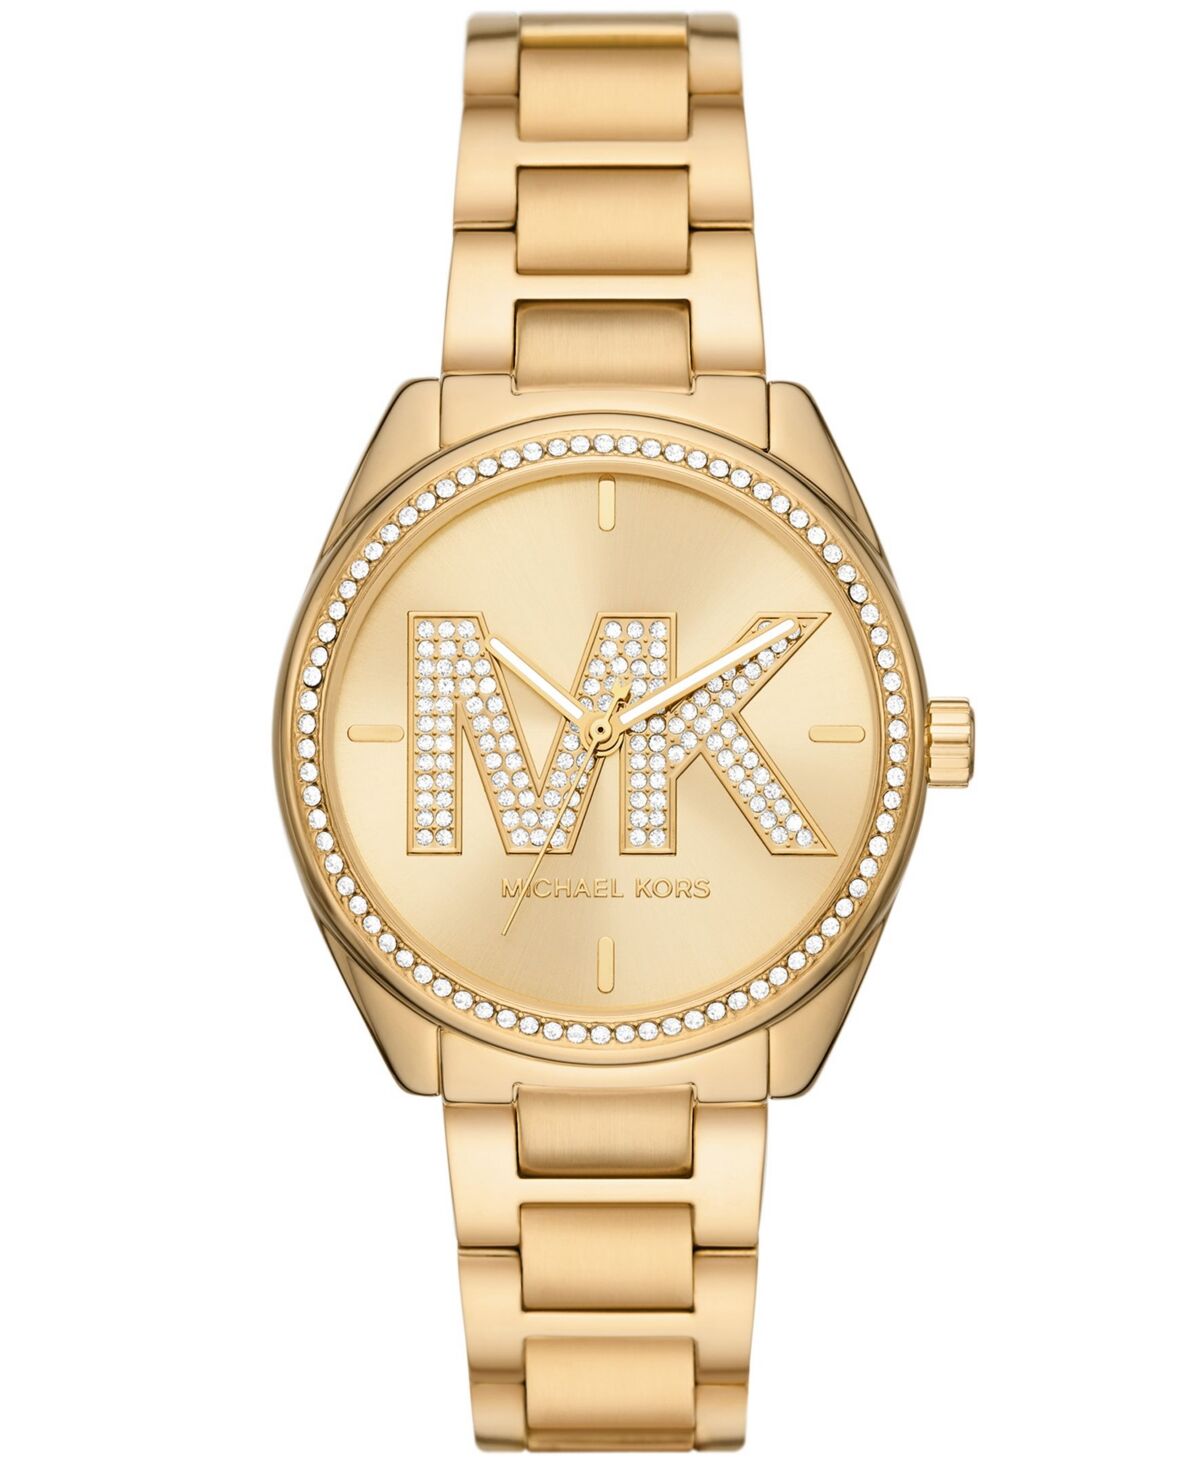 Michael Kors Women's Janelle Three-Hand Gold-Tone Stainless Steel Watch 36mm - Gold-Tone